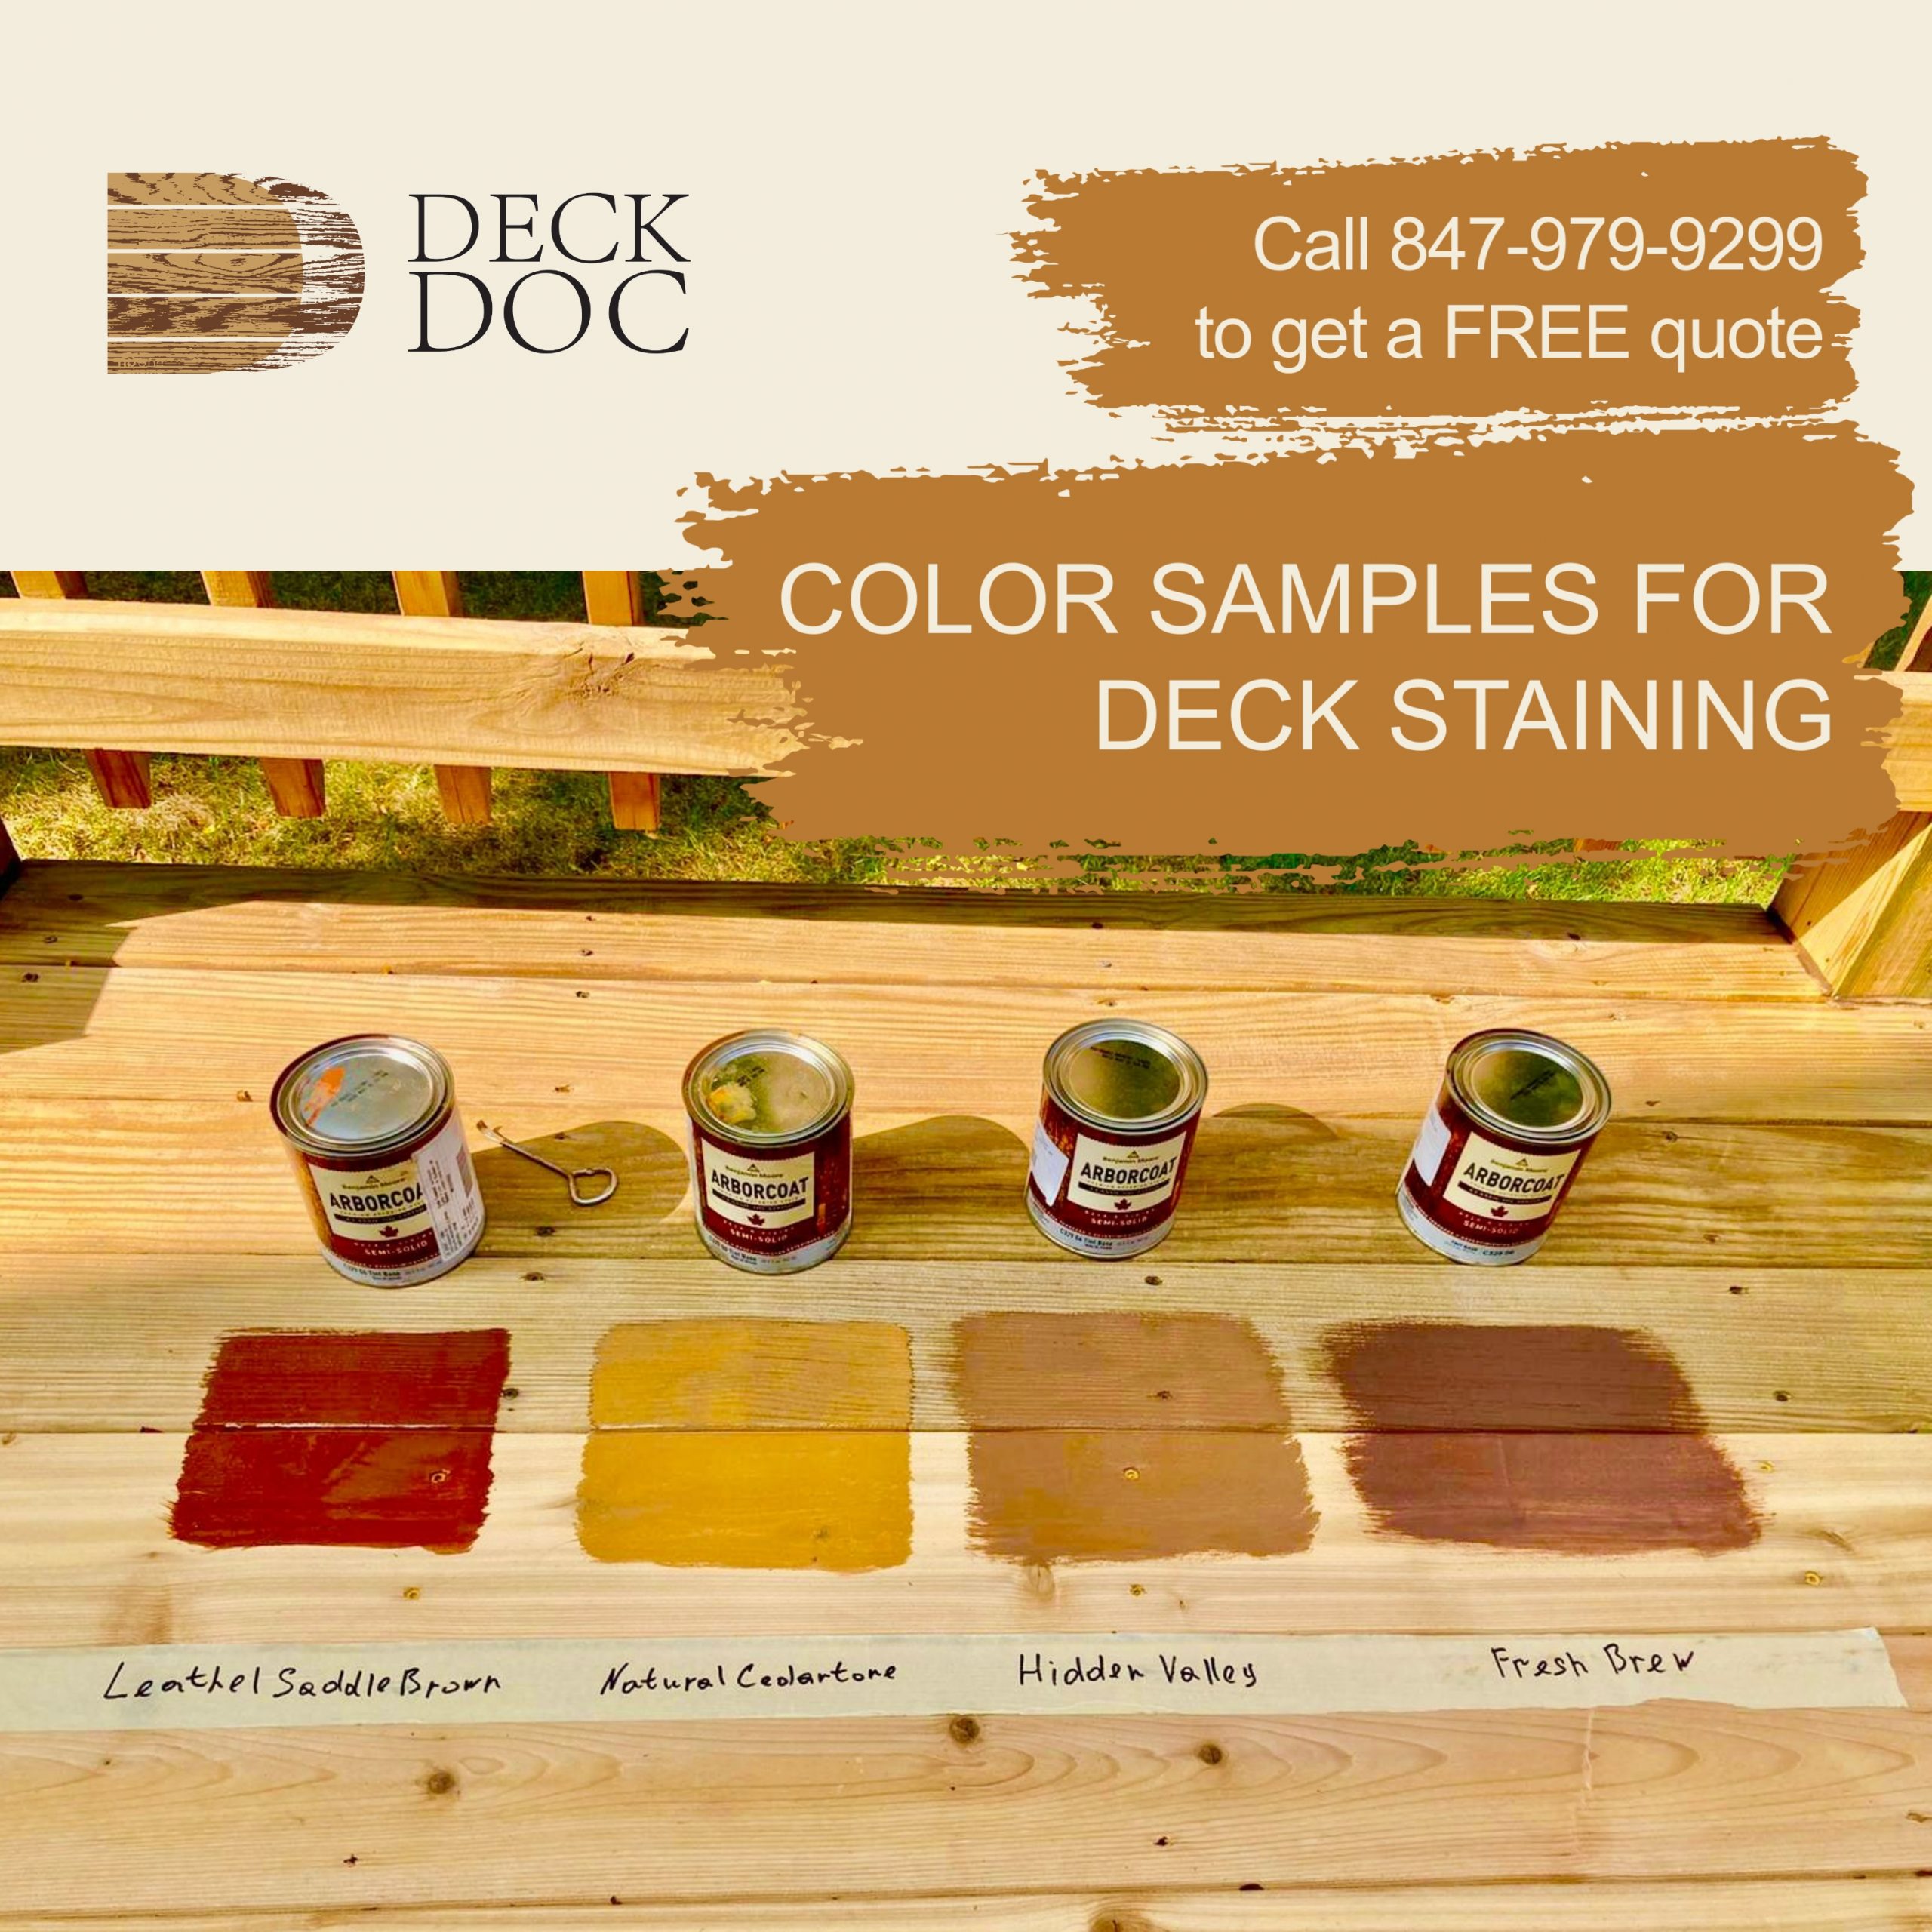 Deck Doc Chicago sealing experts